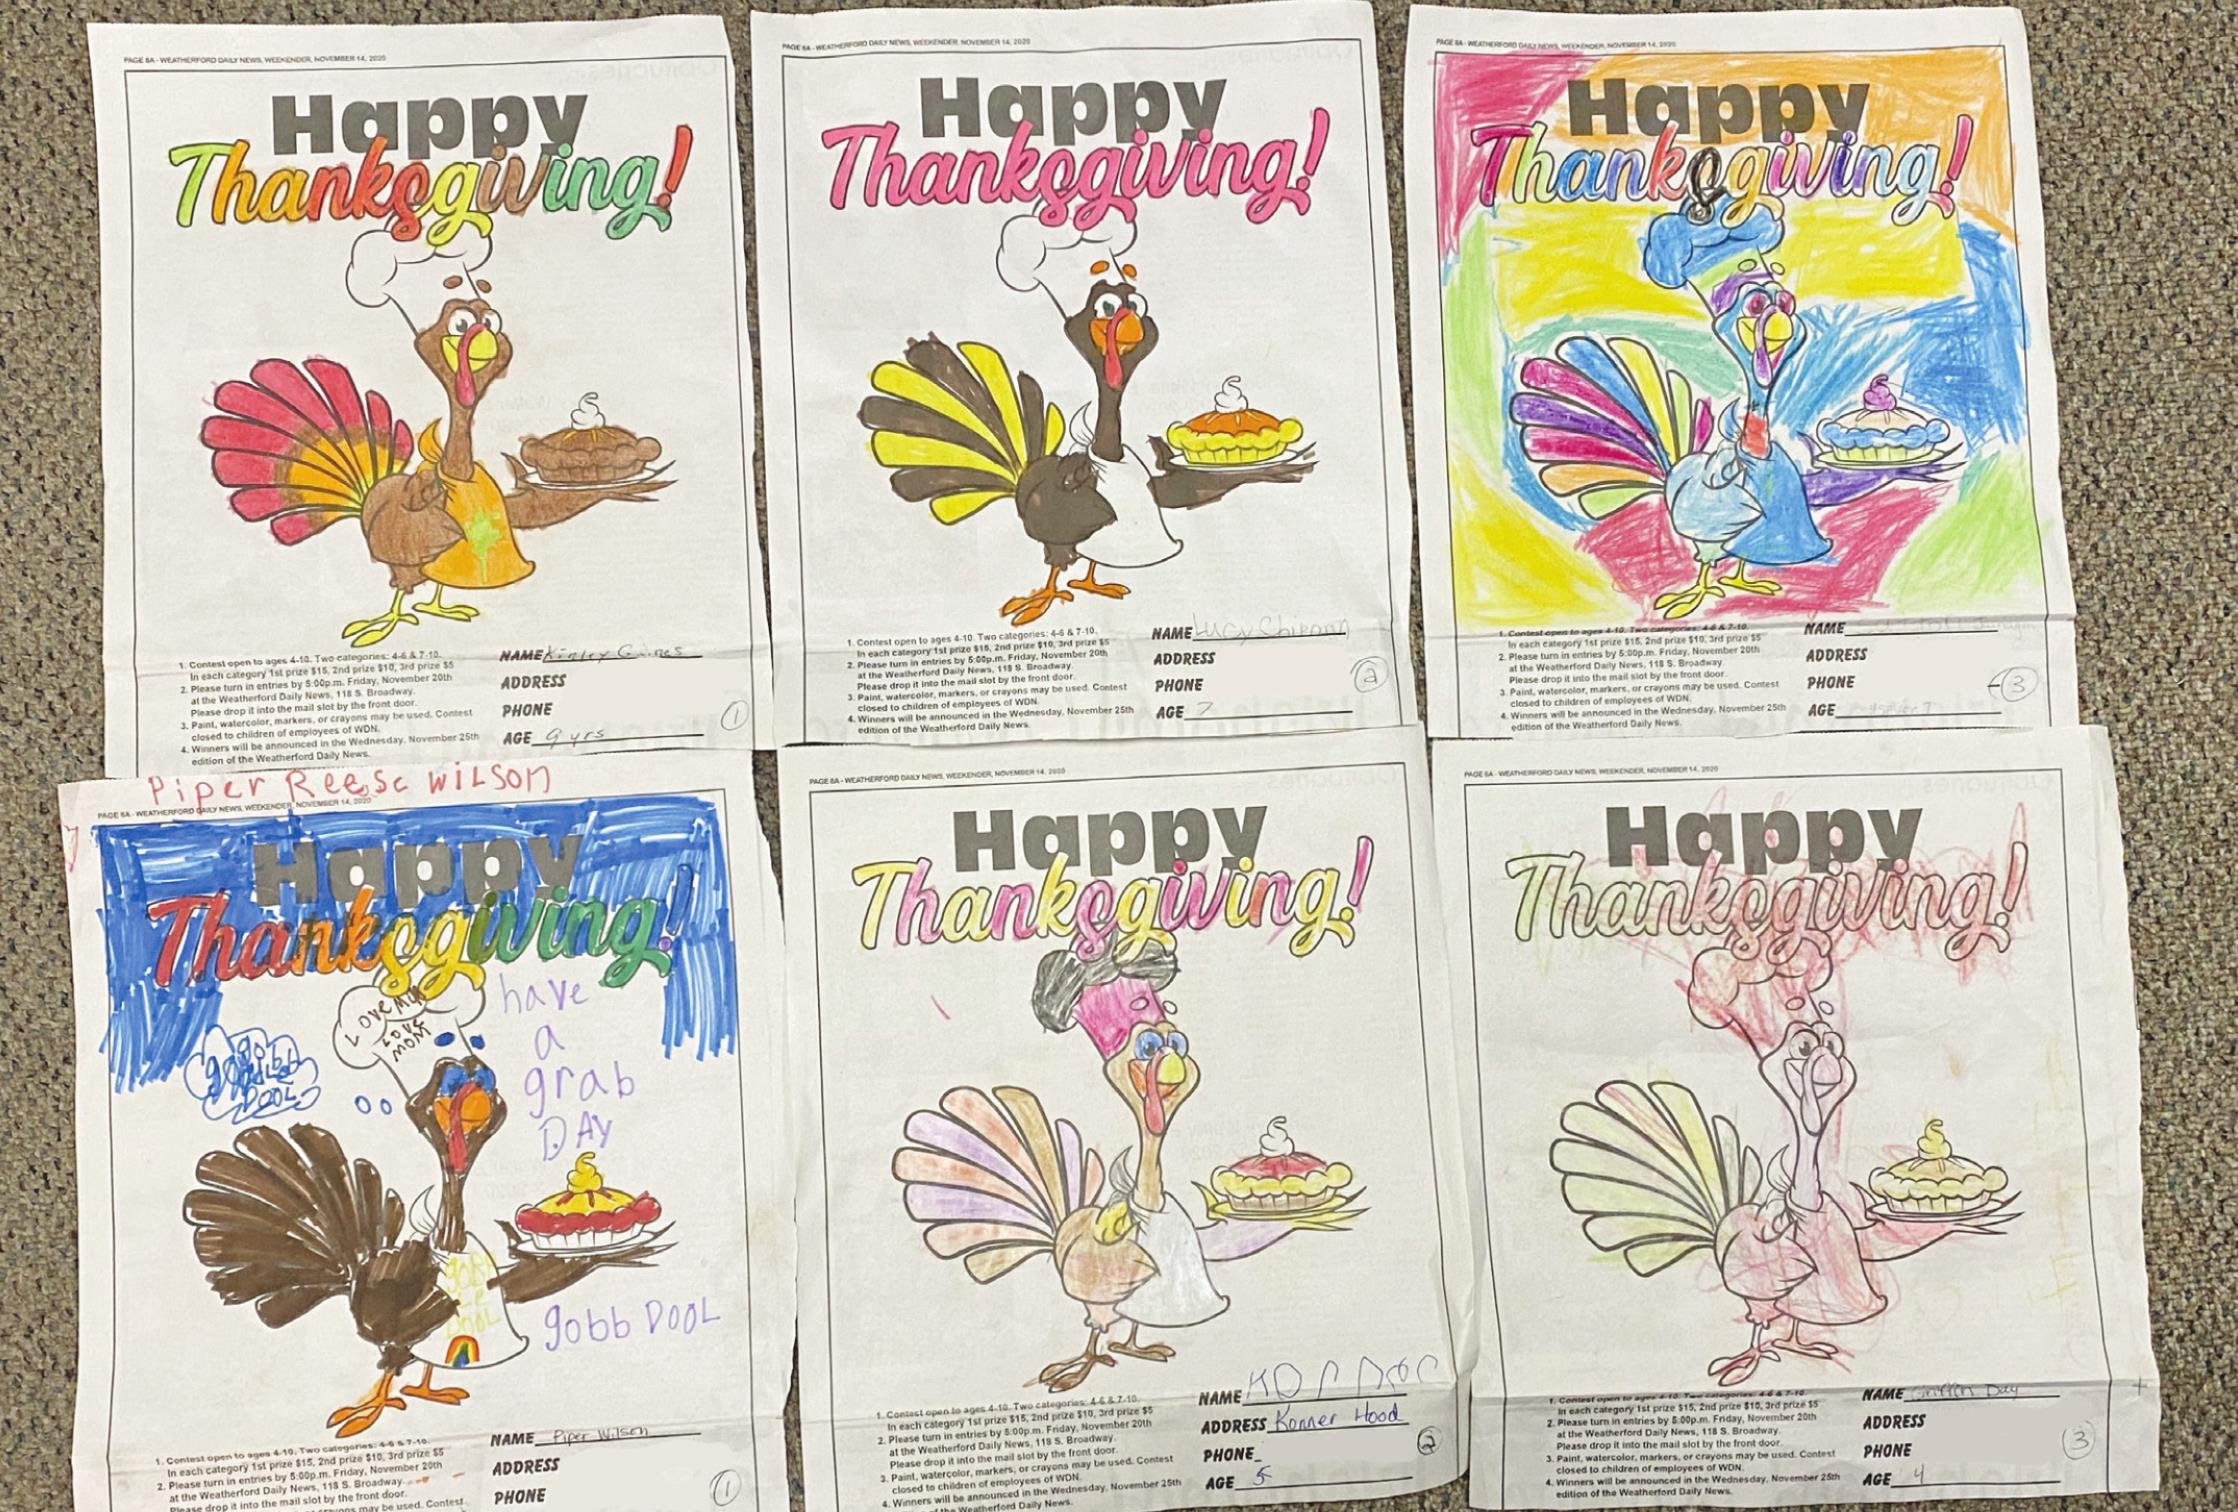 Weatherford Daily News has announced the winners for the Thanksgiving Coloring Contest. The first place winner for the 4-6 age group is Piper Wilson who won $15 followed by Konner Hood who won $10, and Griffin Day who won $5. The first place winner for the 7-10 age groups is Kinley Gaines who won $15 followed by Lucy Chipman who won $10 and Sutton Jarnagin who won $5. Josh Jennings/WDN